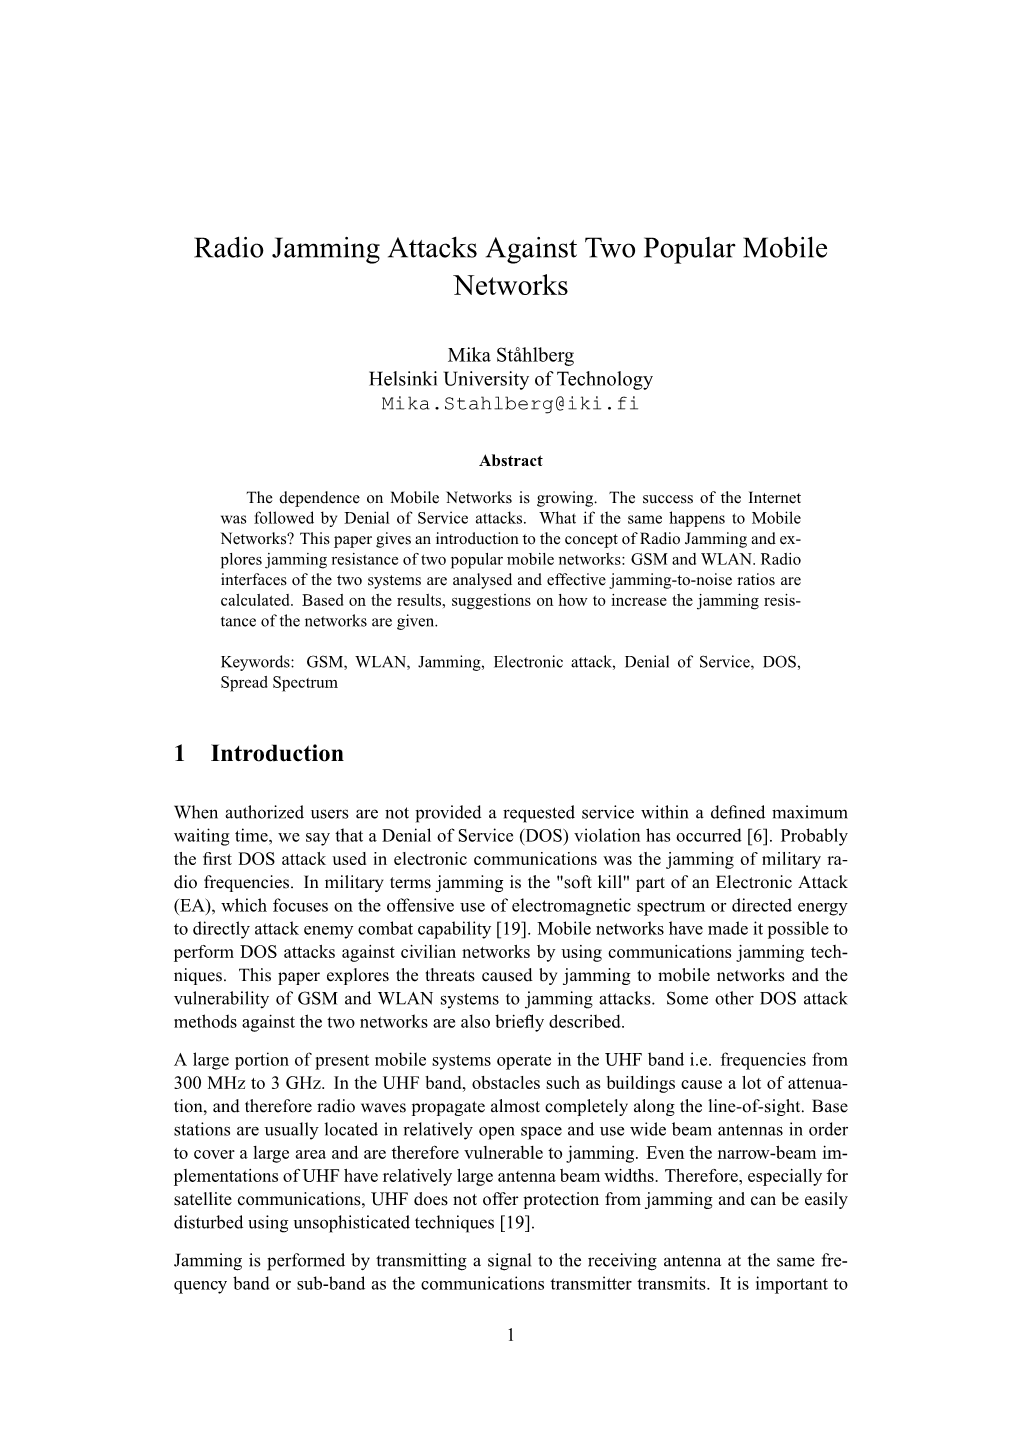 Radio Jamming Attacks Against Two Popular Mobile Networks